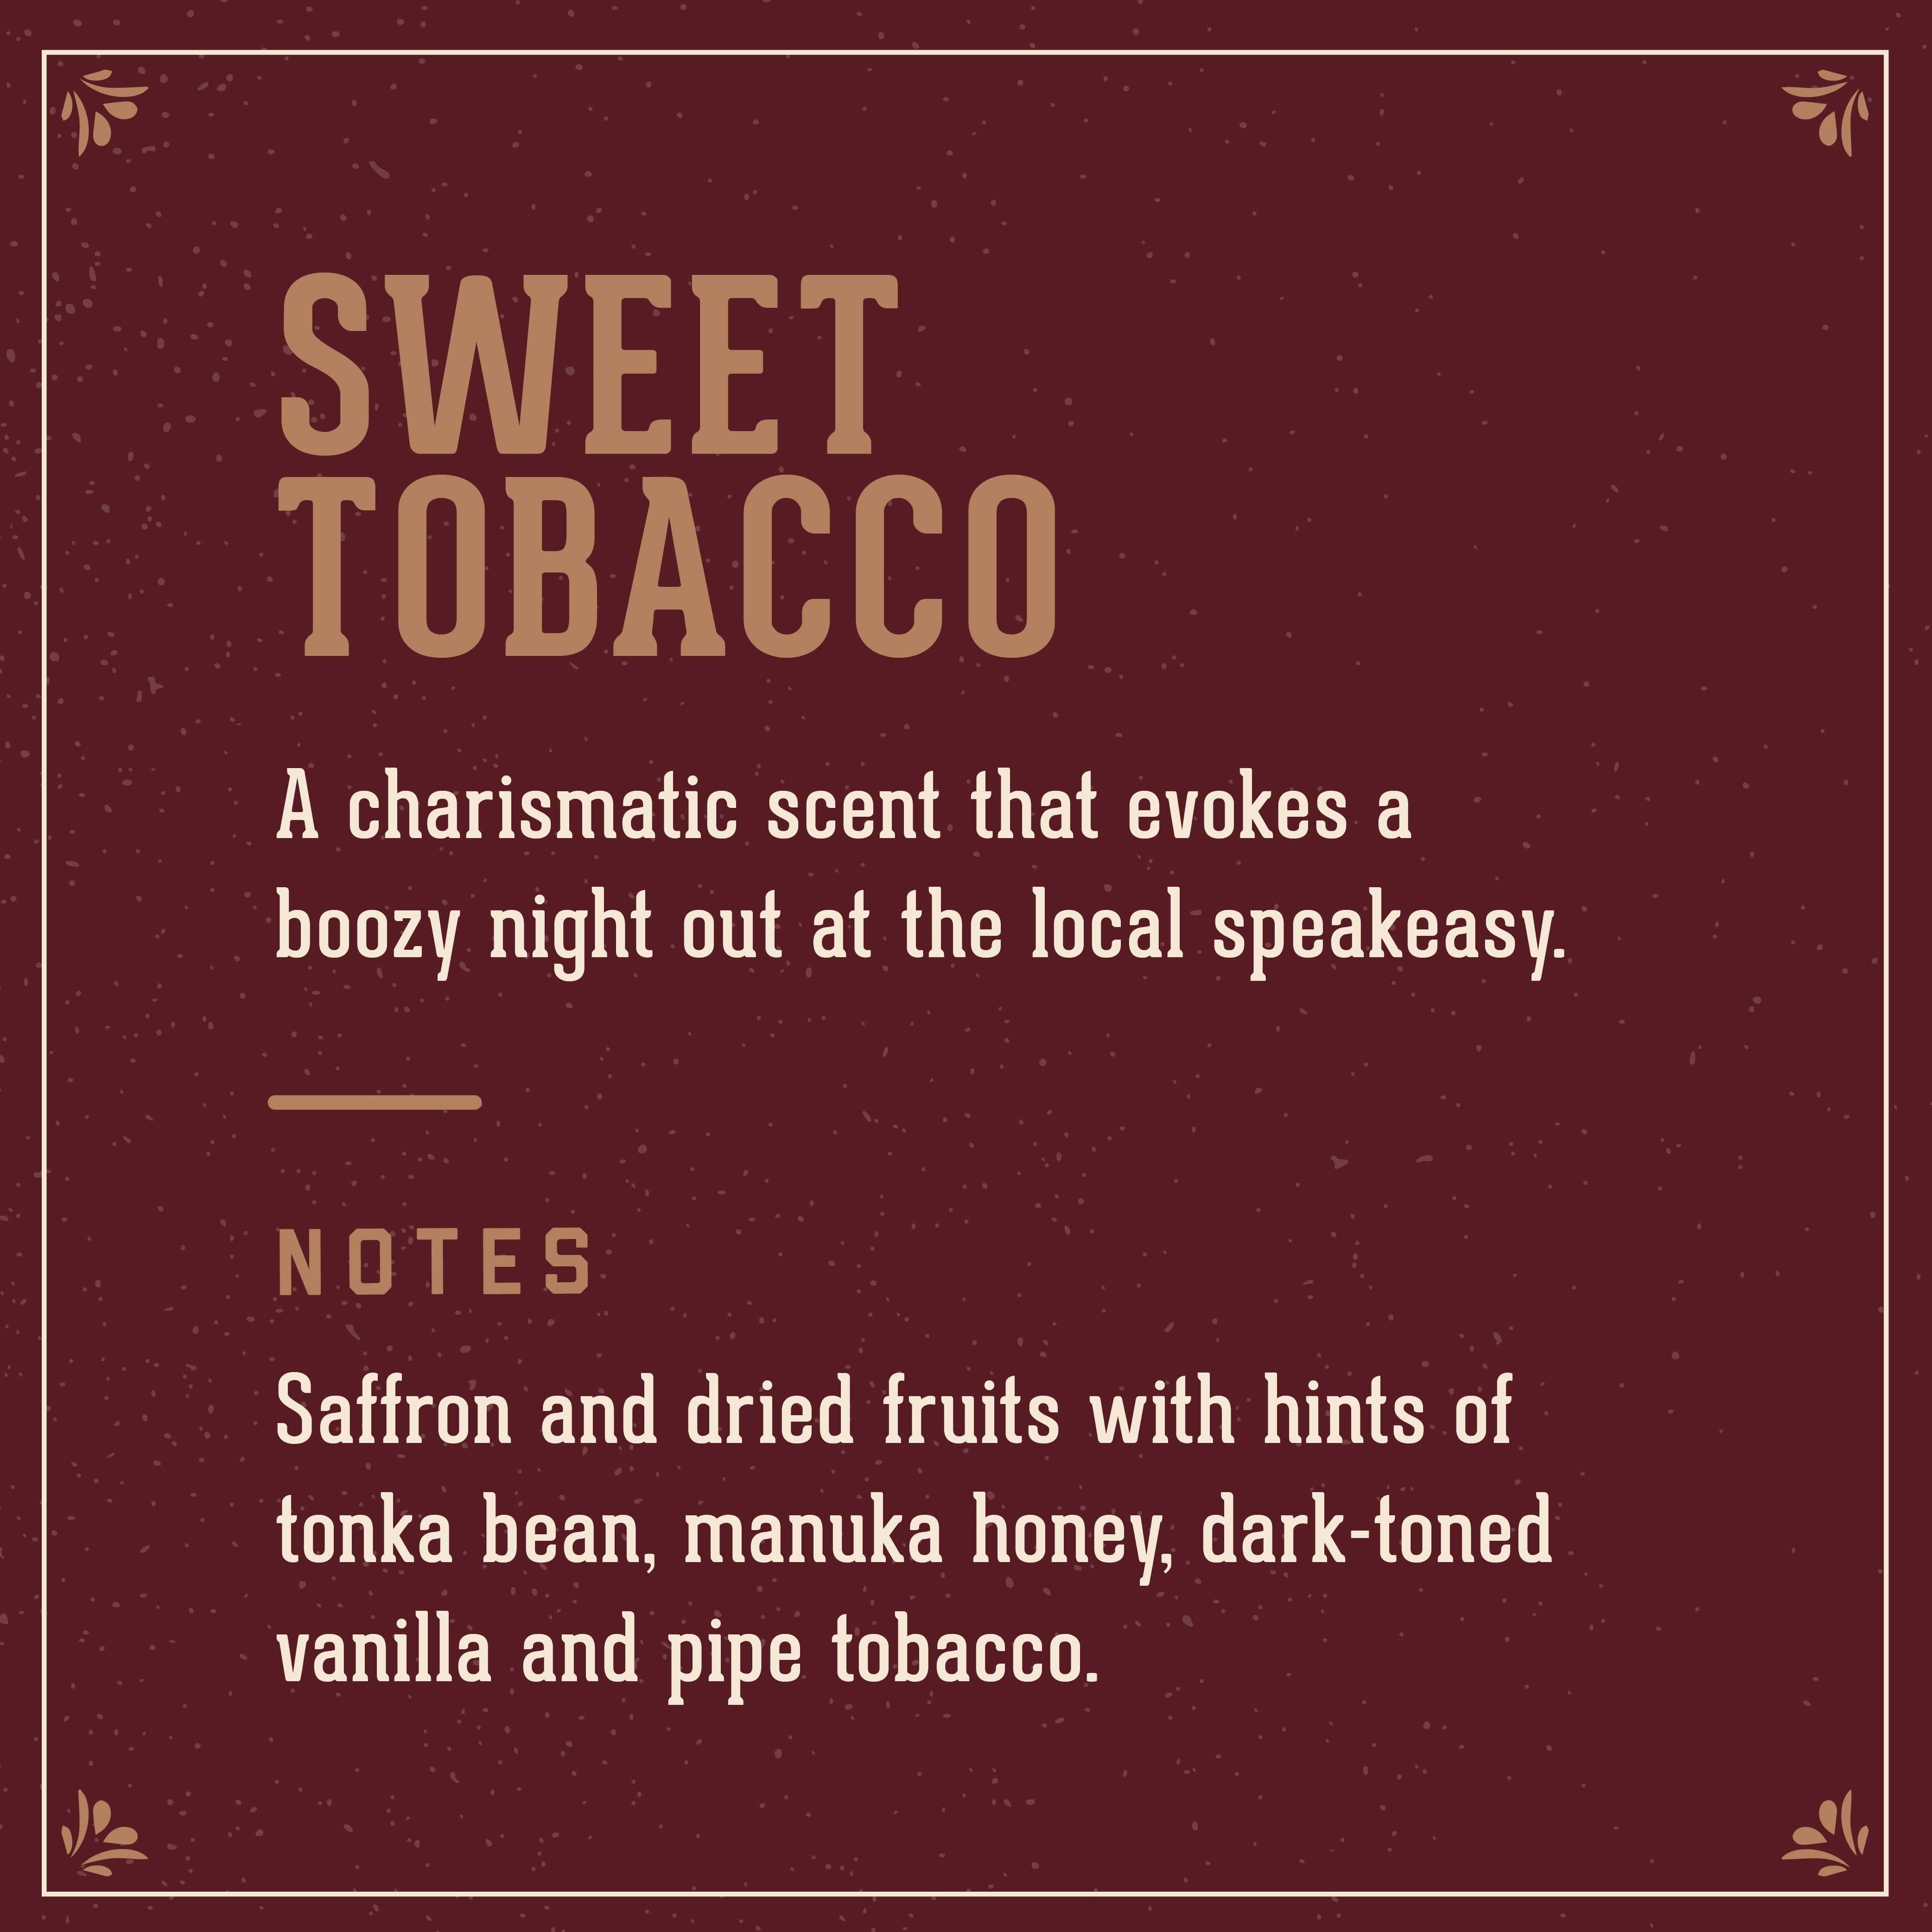 Sweet Tobacco signature scent: a charismatic scent that evokes a boozy night out at the local speakeasy. Notes of saffron and dried fruits with hints of tonka bean, manuka honey, dark-toned vanilla and pipe tobacco